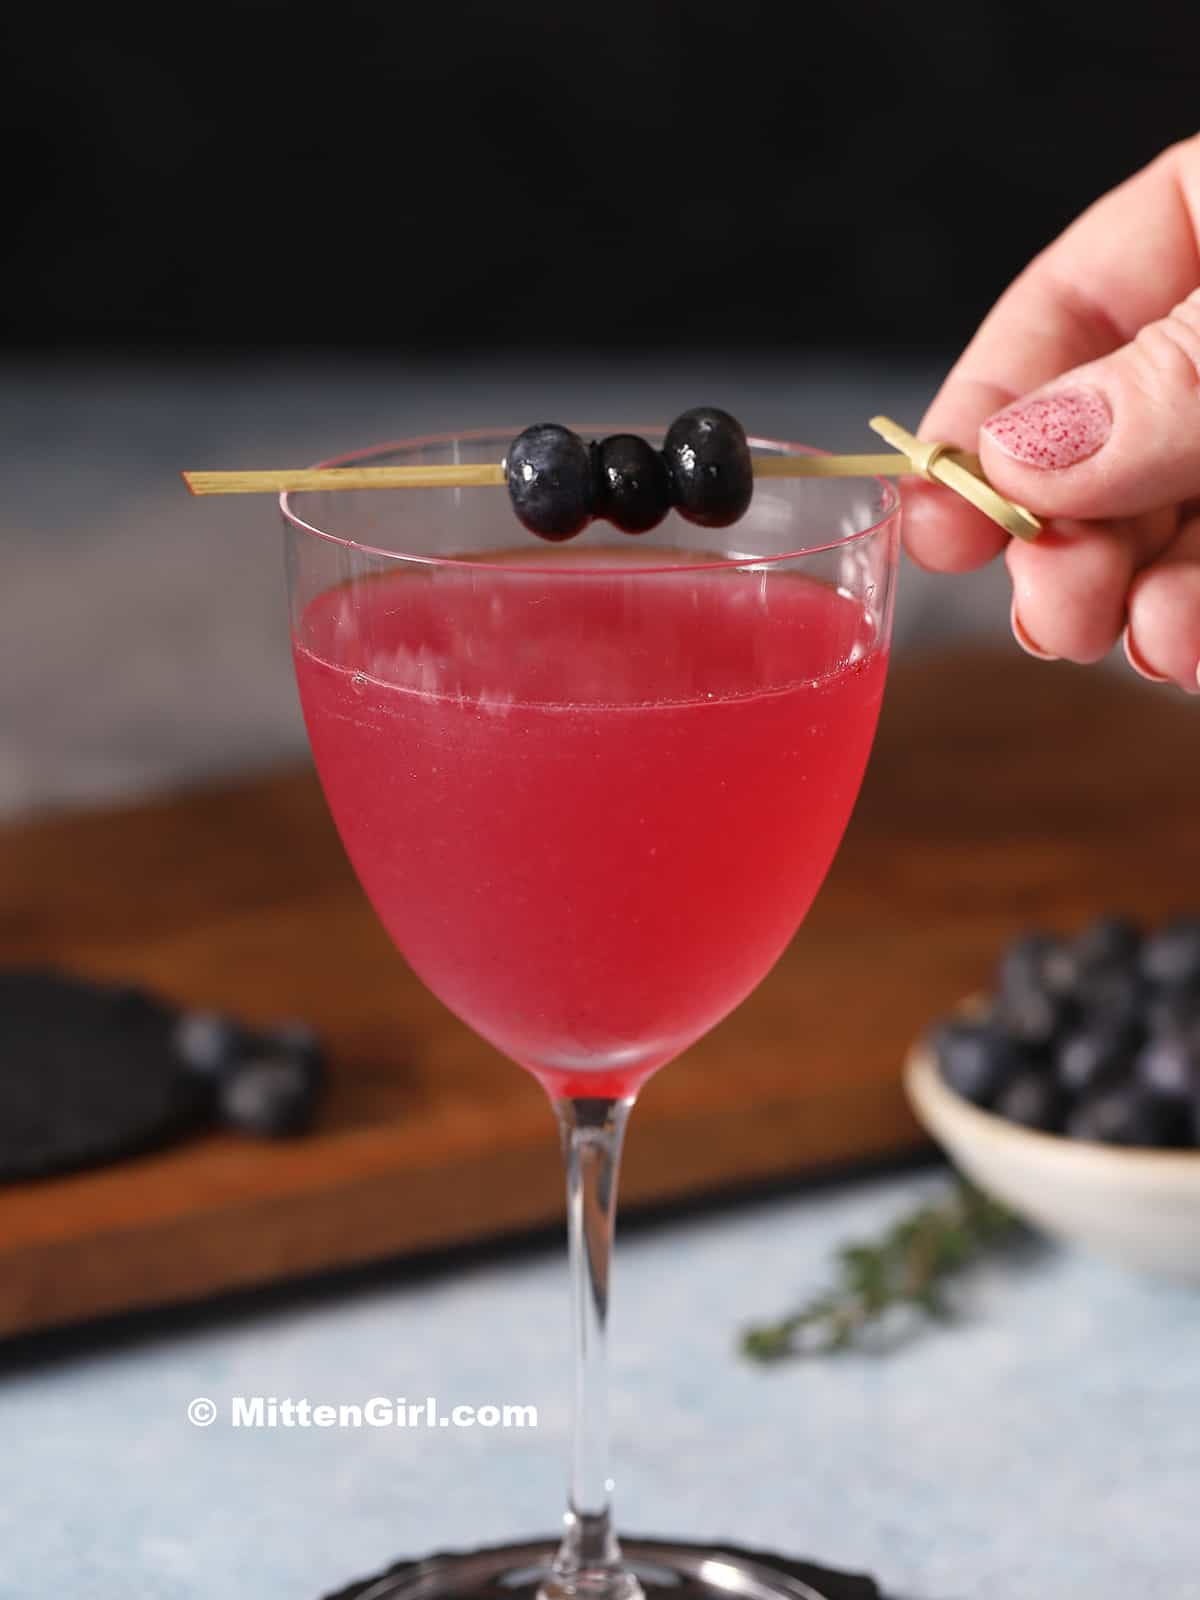 A hand placing blueberrybgarnish on a cocktial.